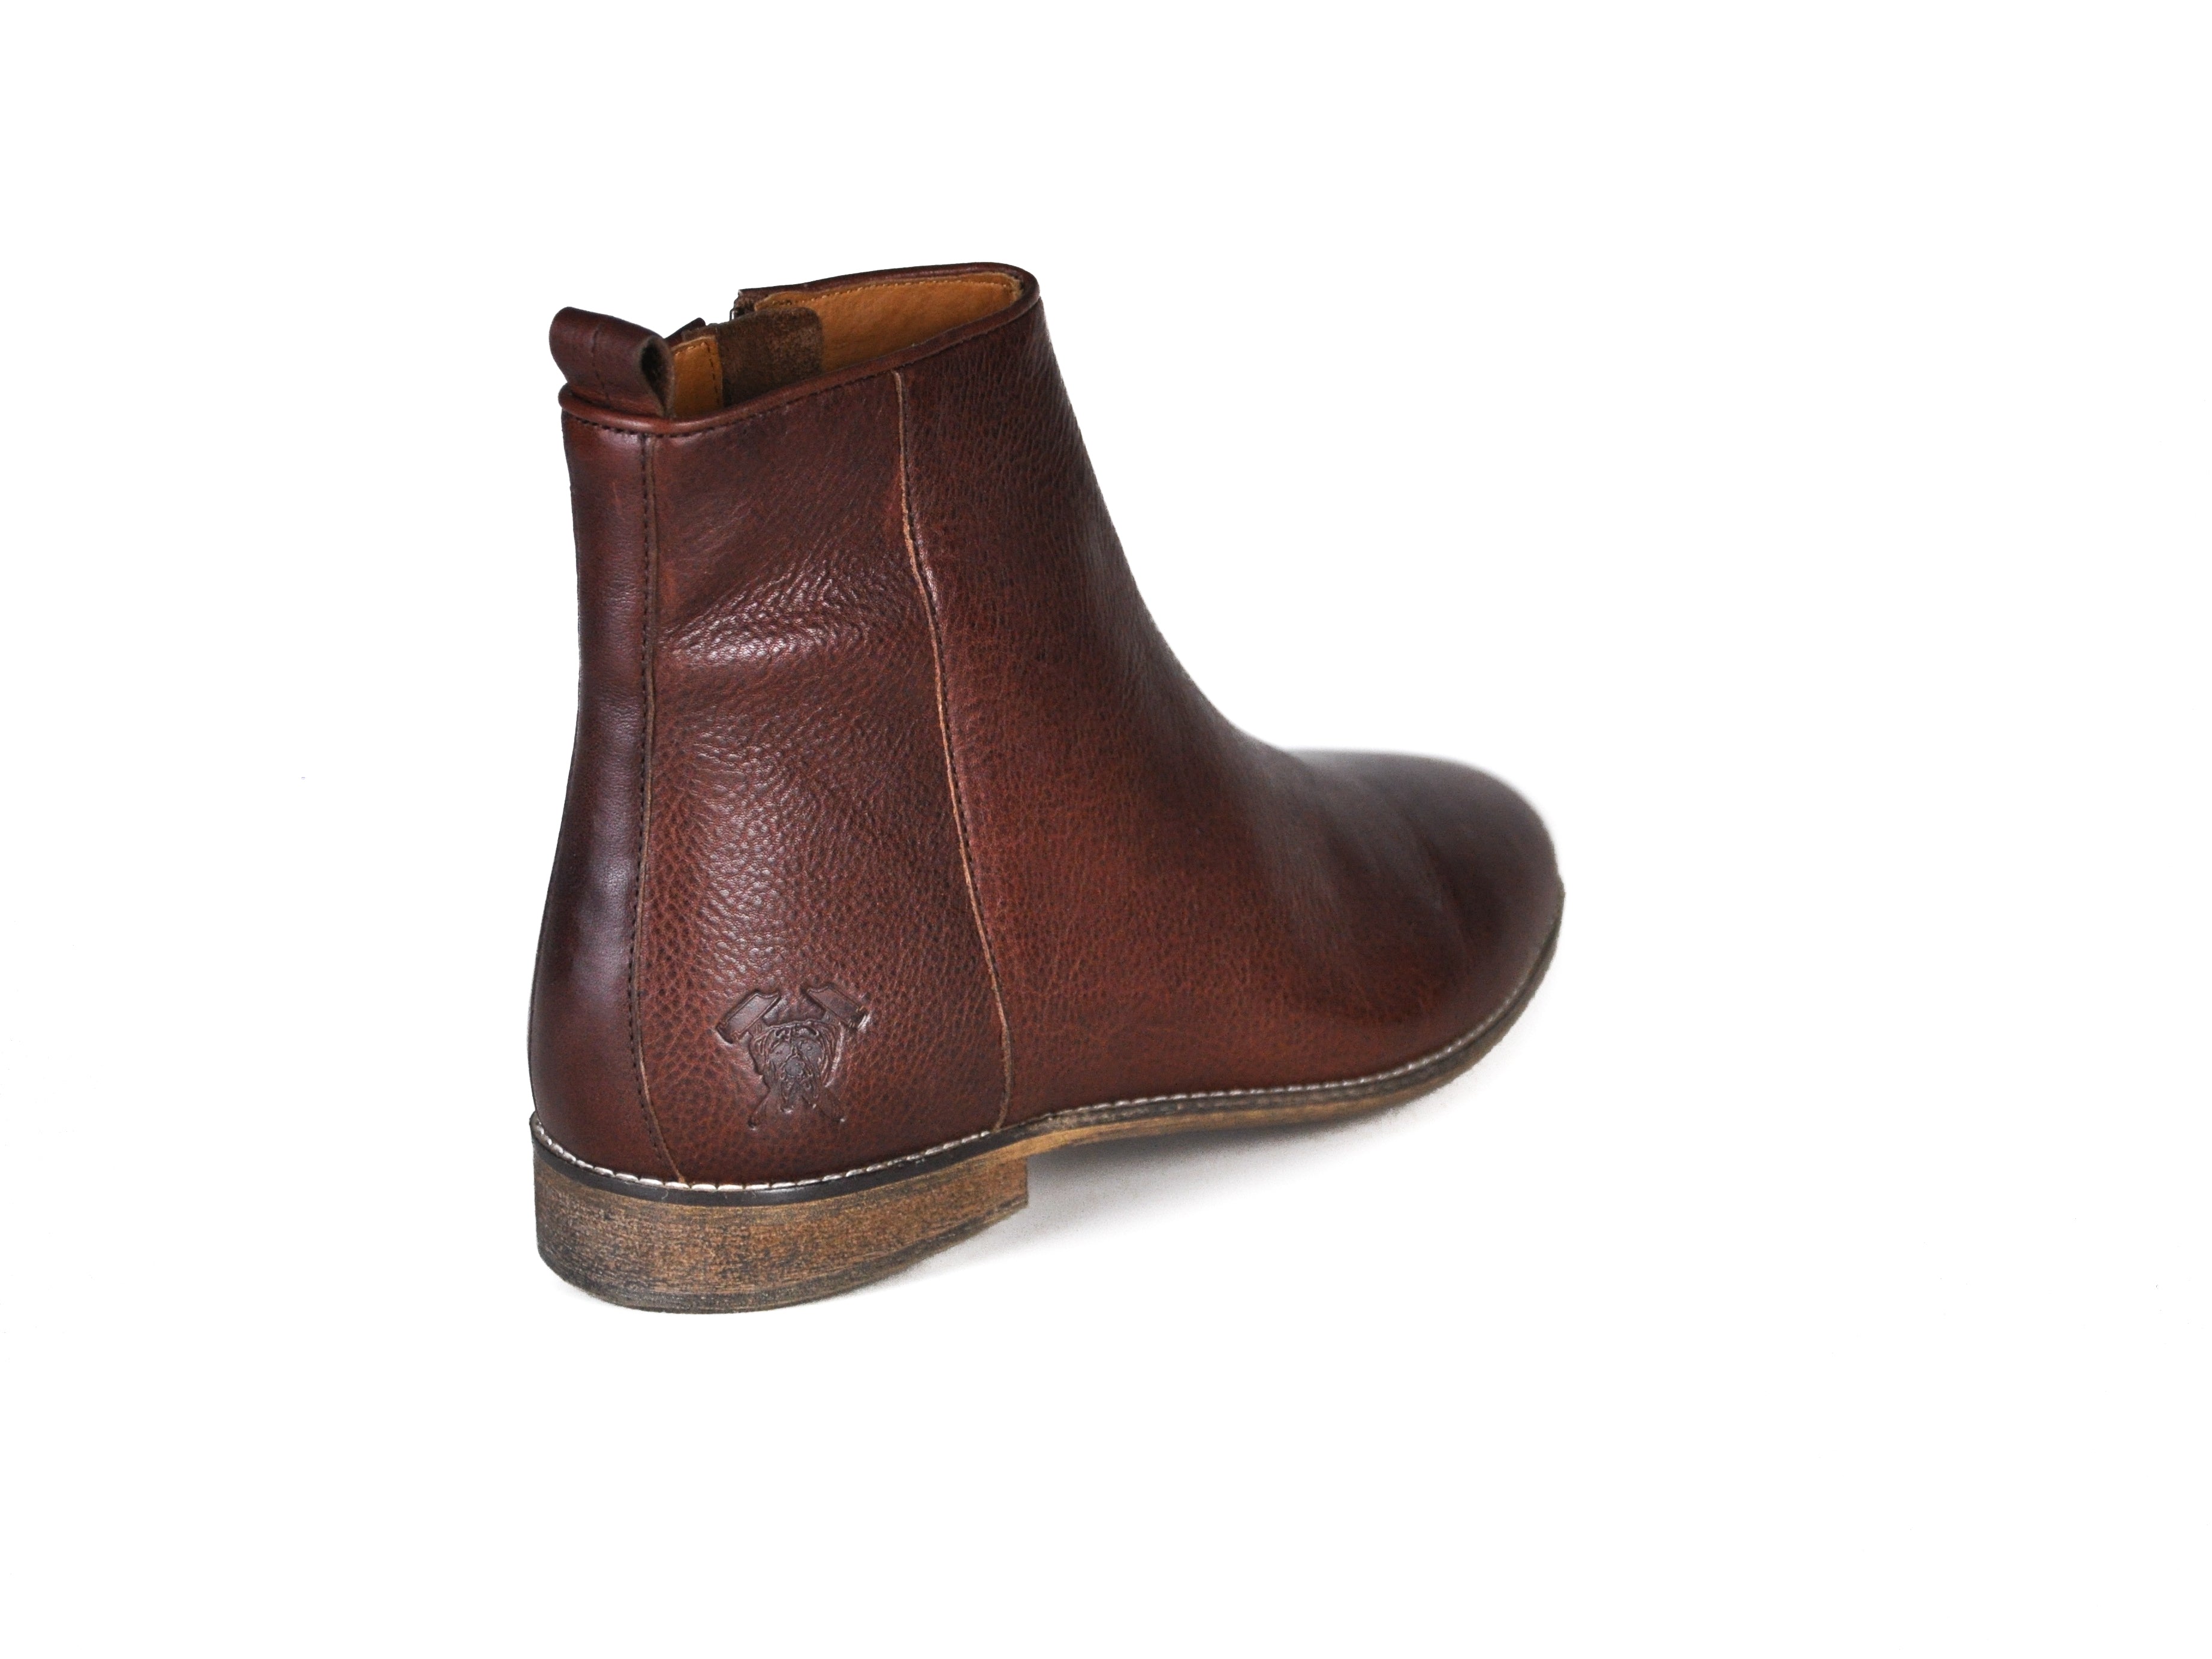 Chelsea Boot - The Gunnar Mens Boot | Cognac - Hound and Hammer Boots